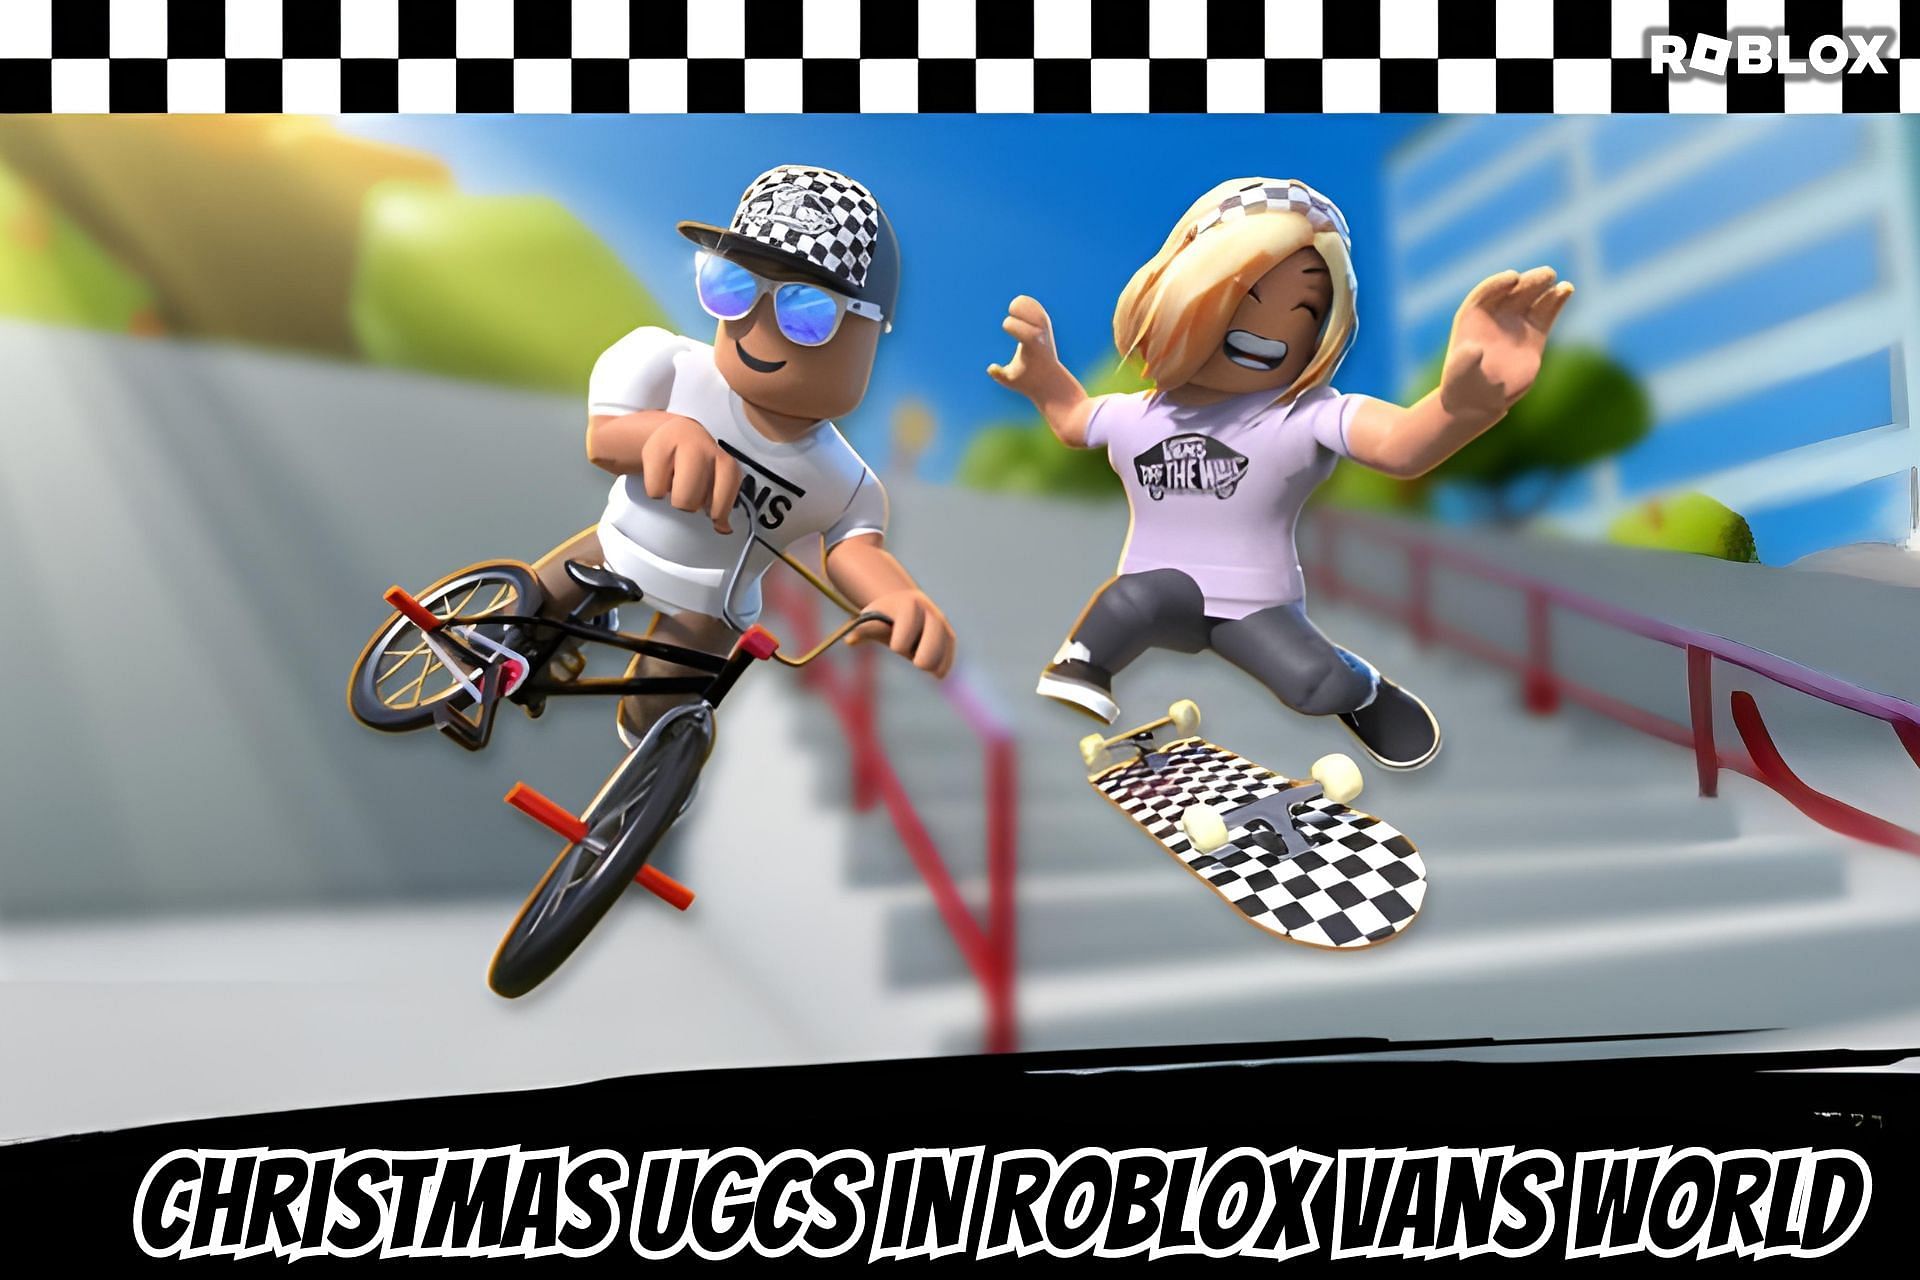 Get the free hats (Image via Roblox)